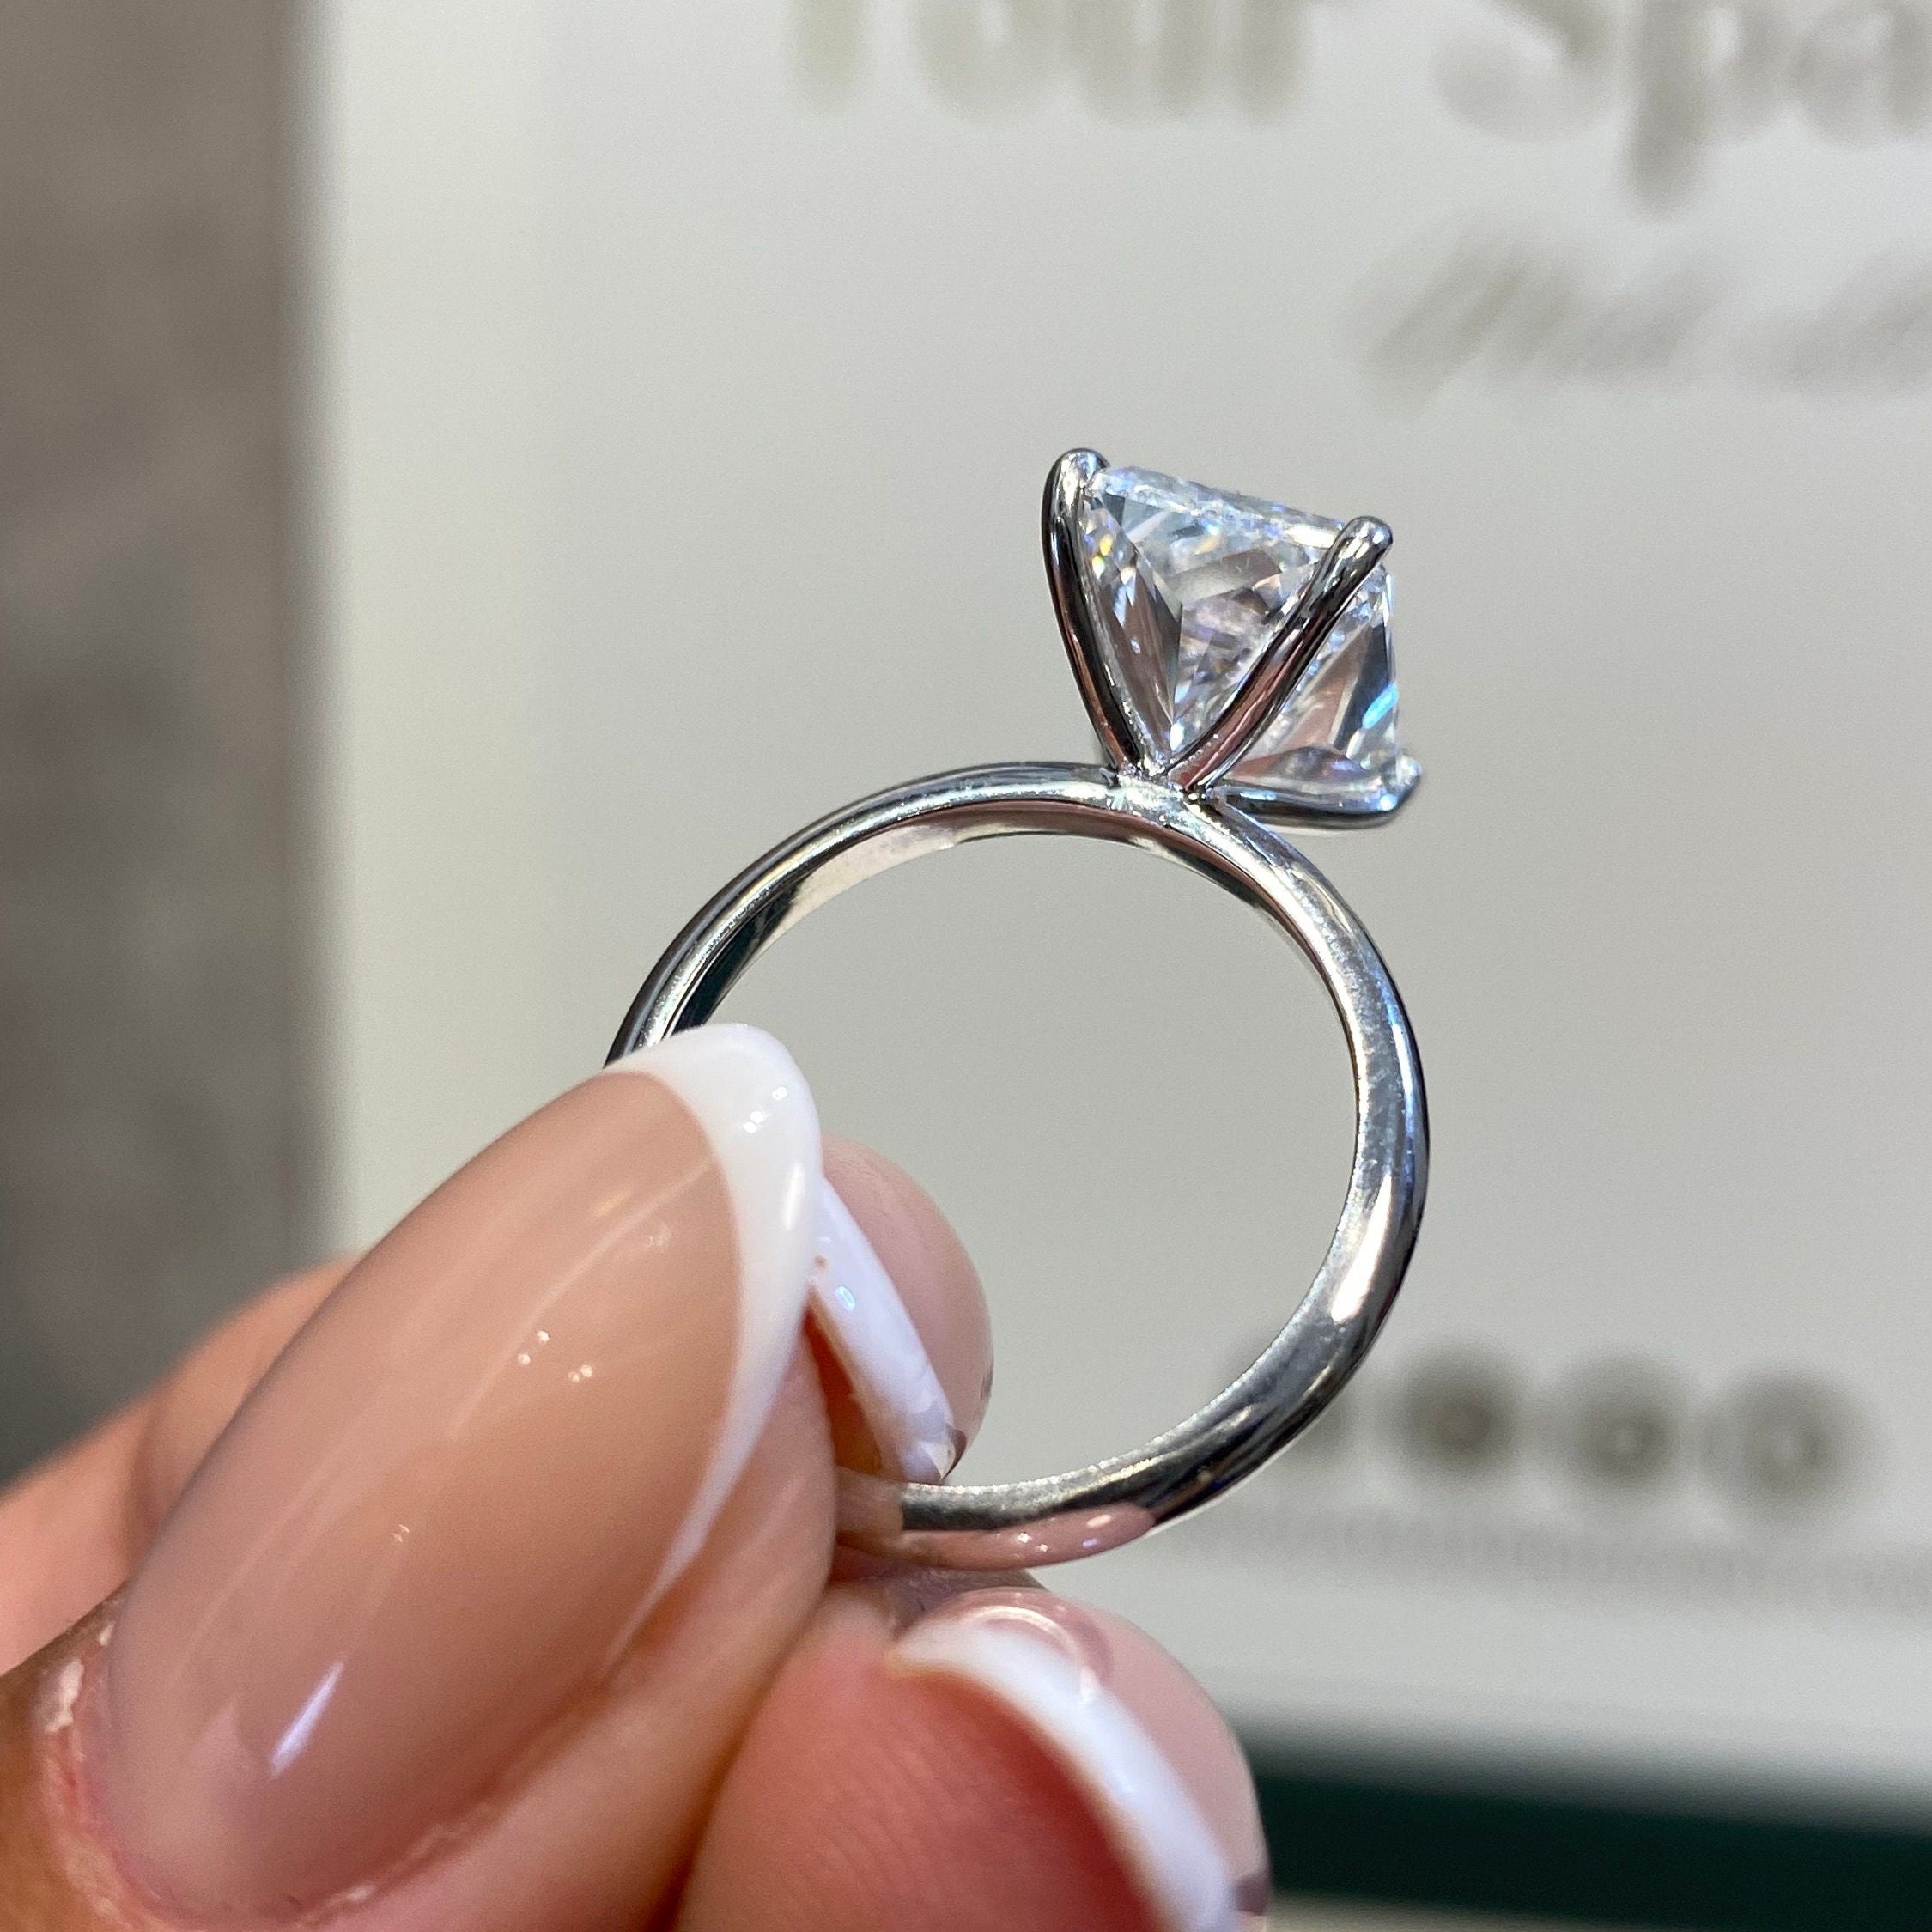 Engagement Ring Setting: What's Your Style? - International Gem Society